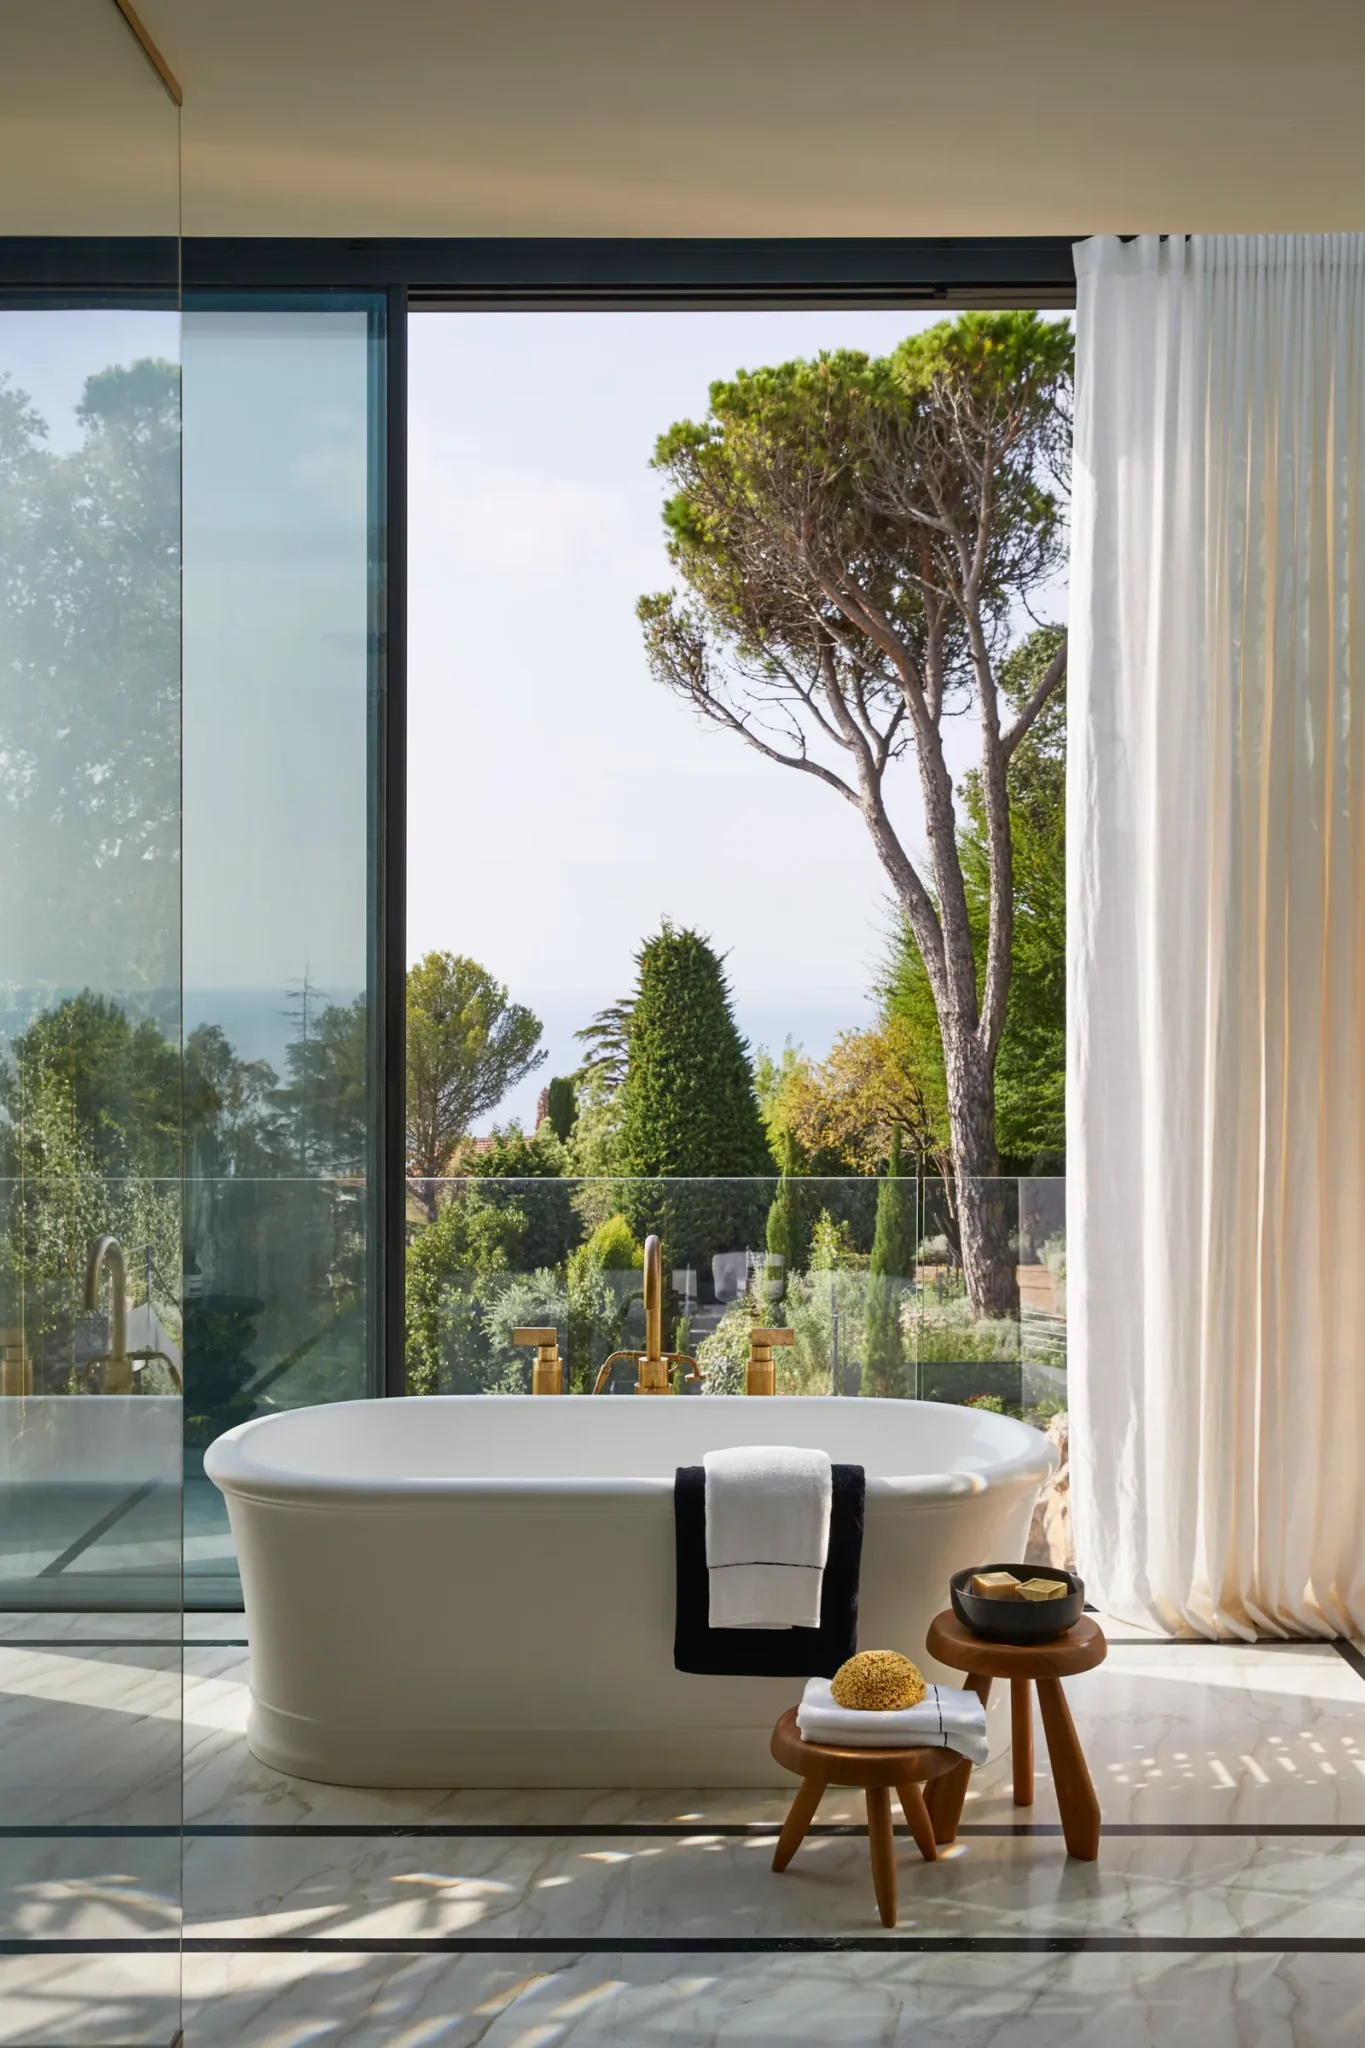 Bathroom with a glass sliding door to the outdoors